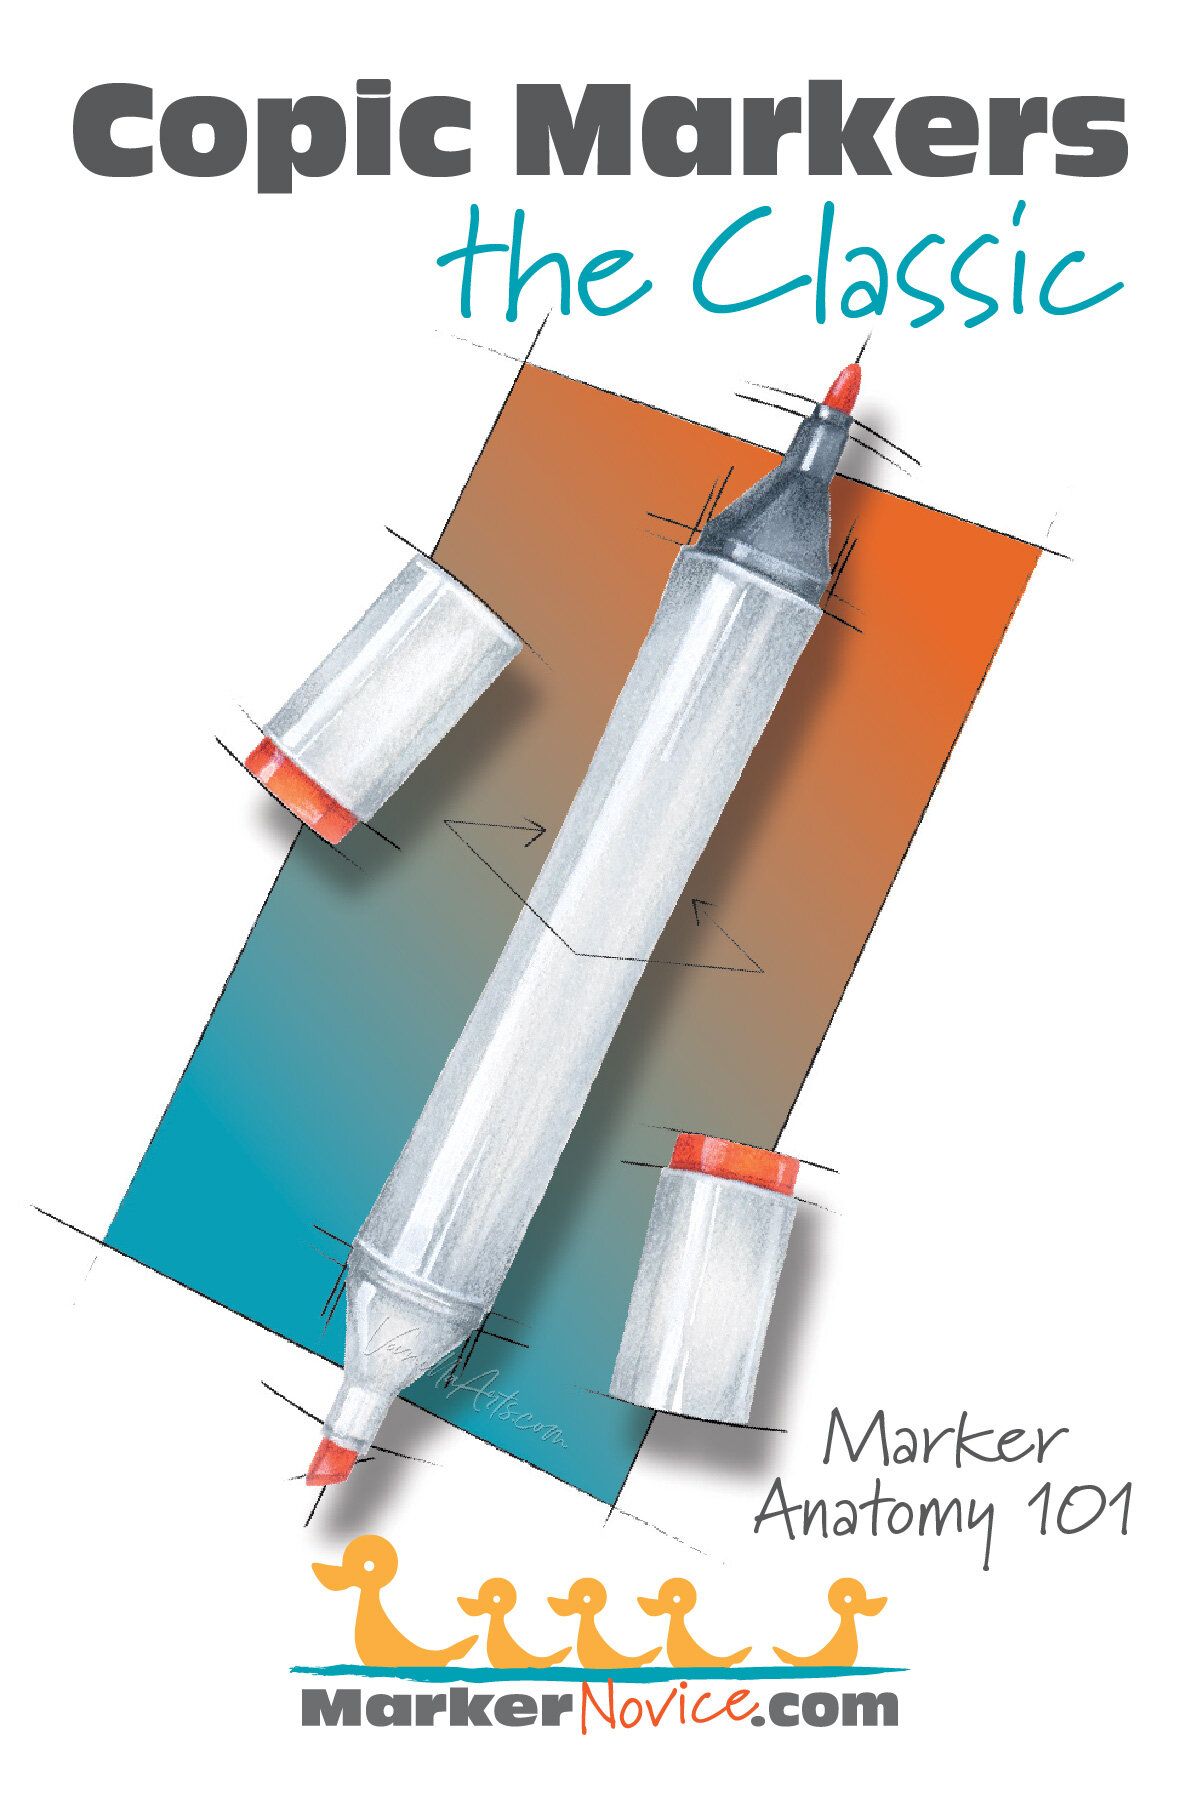 Copic Classic Marker: All About the Original Copic + Best Drawing